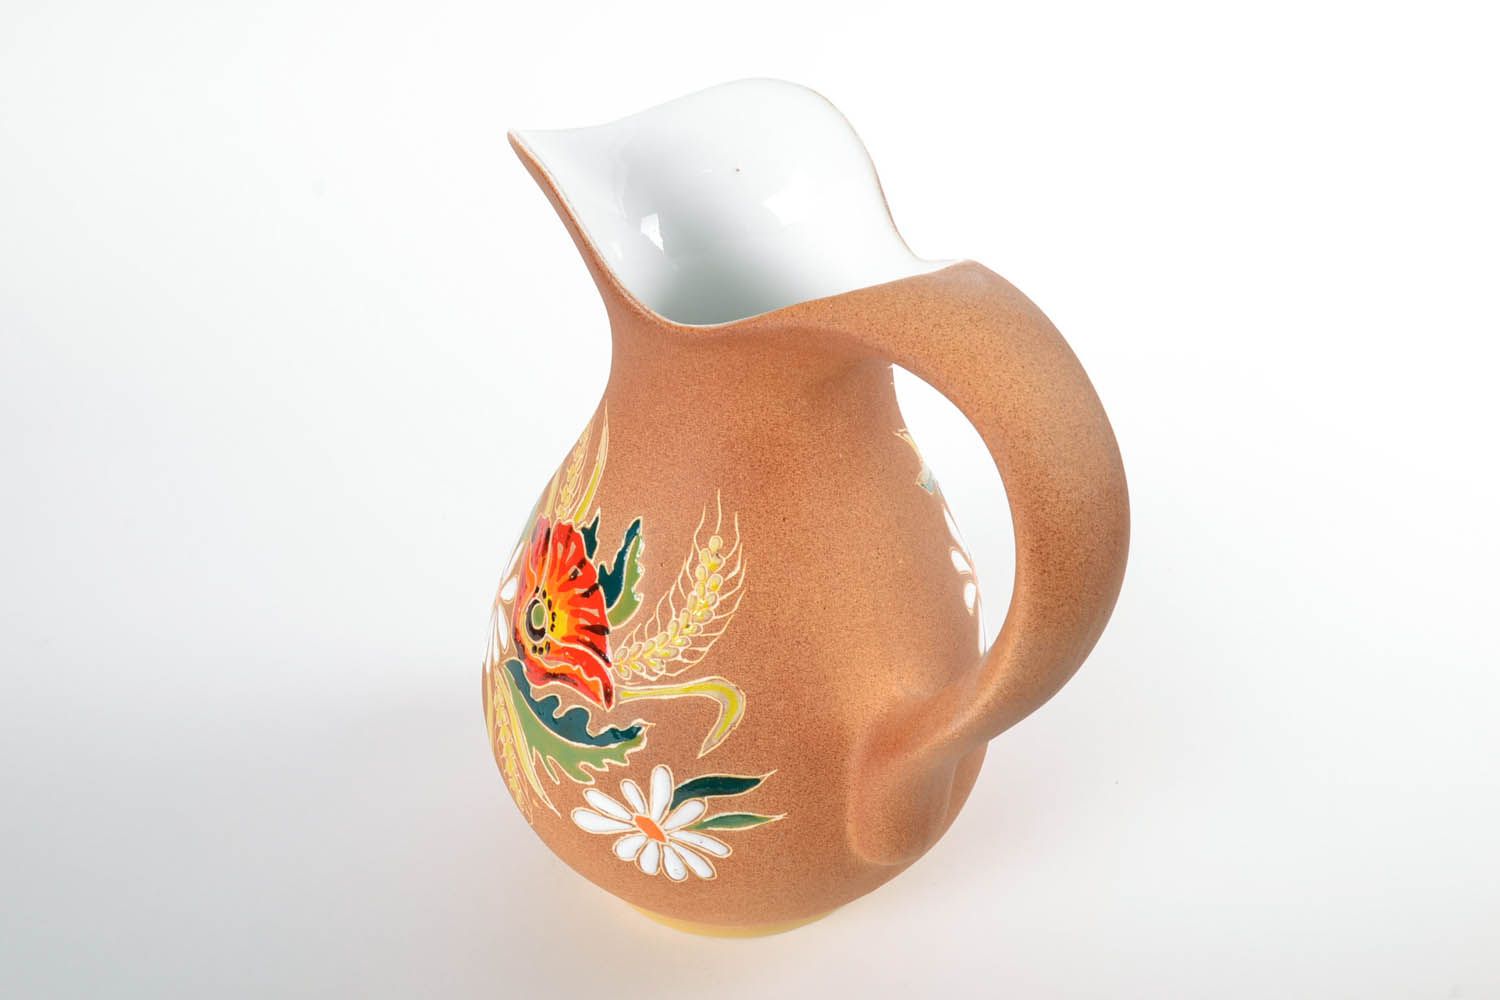 100 oz ceramic handmade water pitcher jug with handle and floral décor 4 lb photo 4